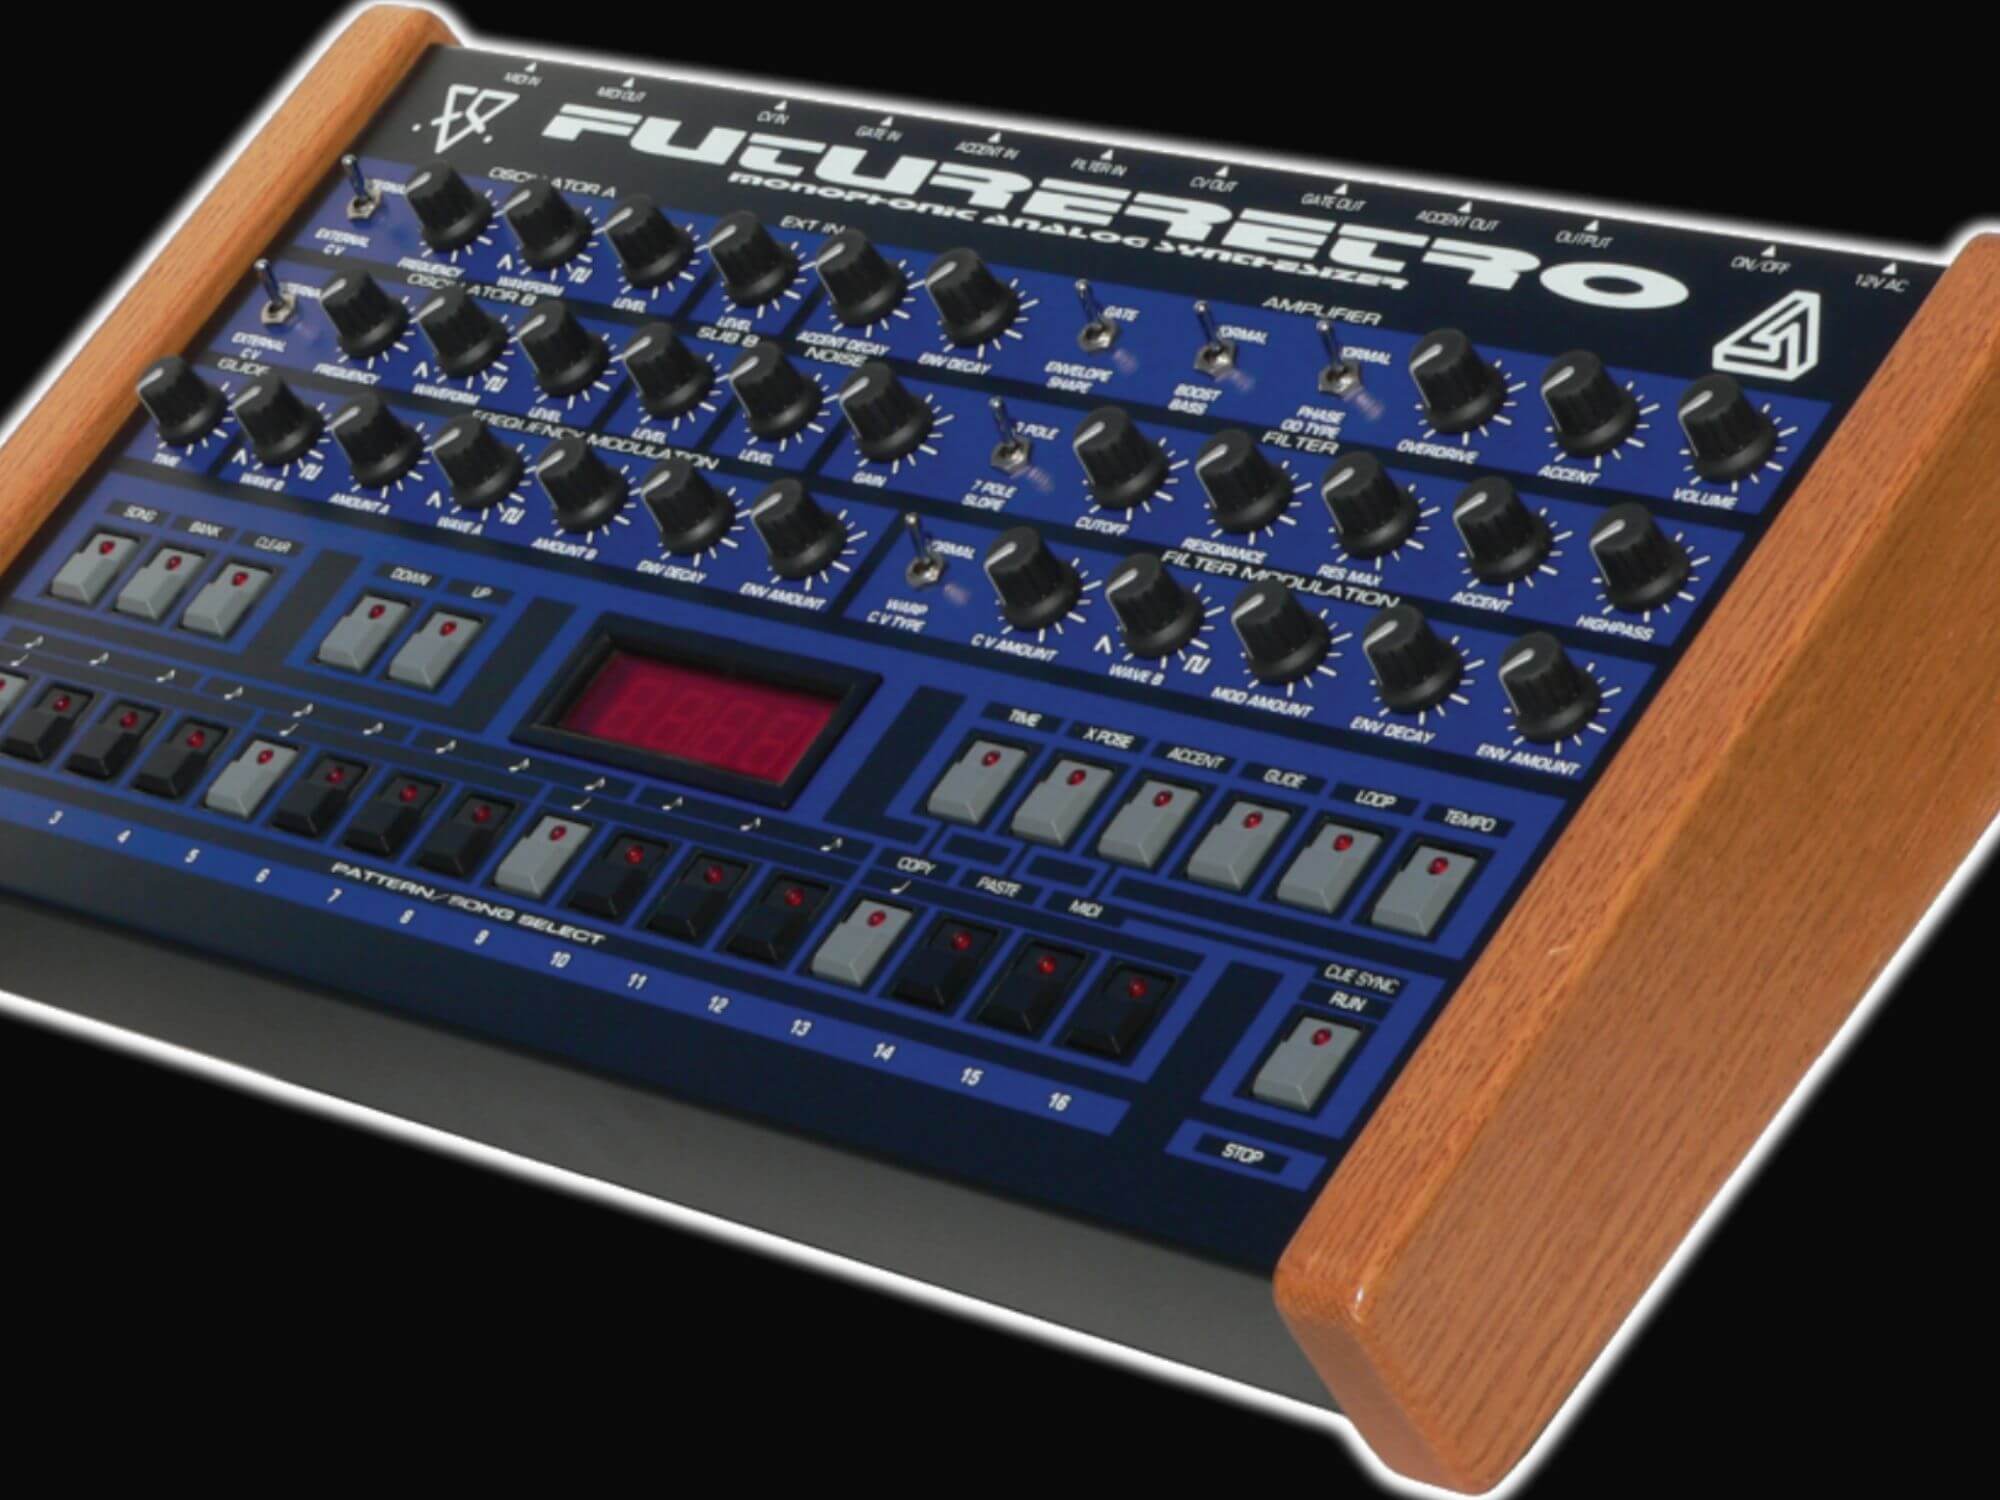 FutureRetro re-released 777 Synthesiser